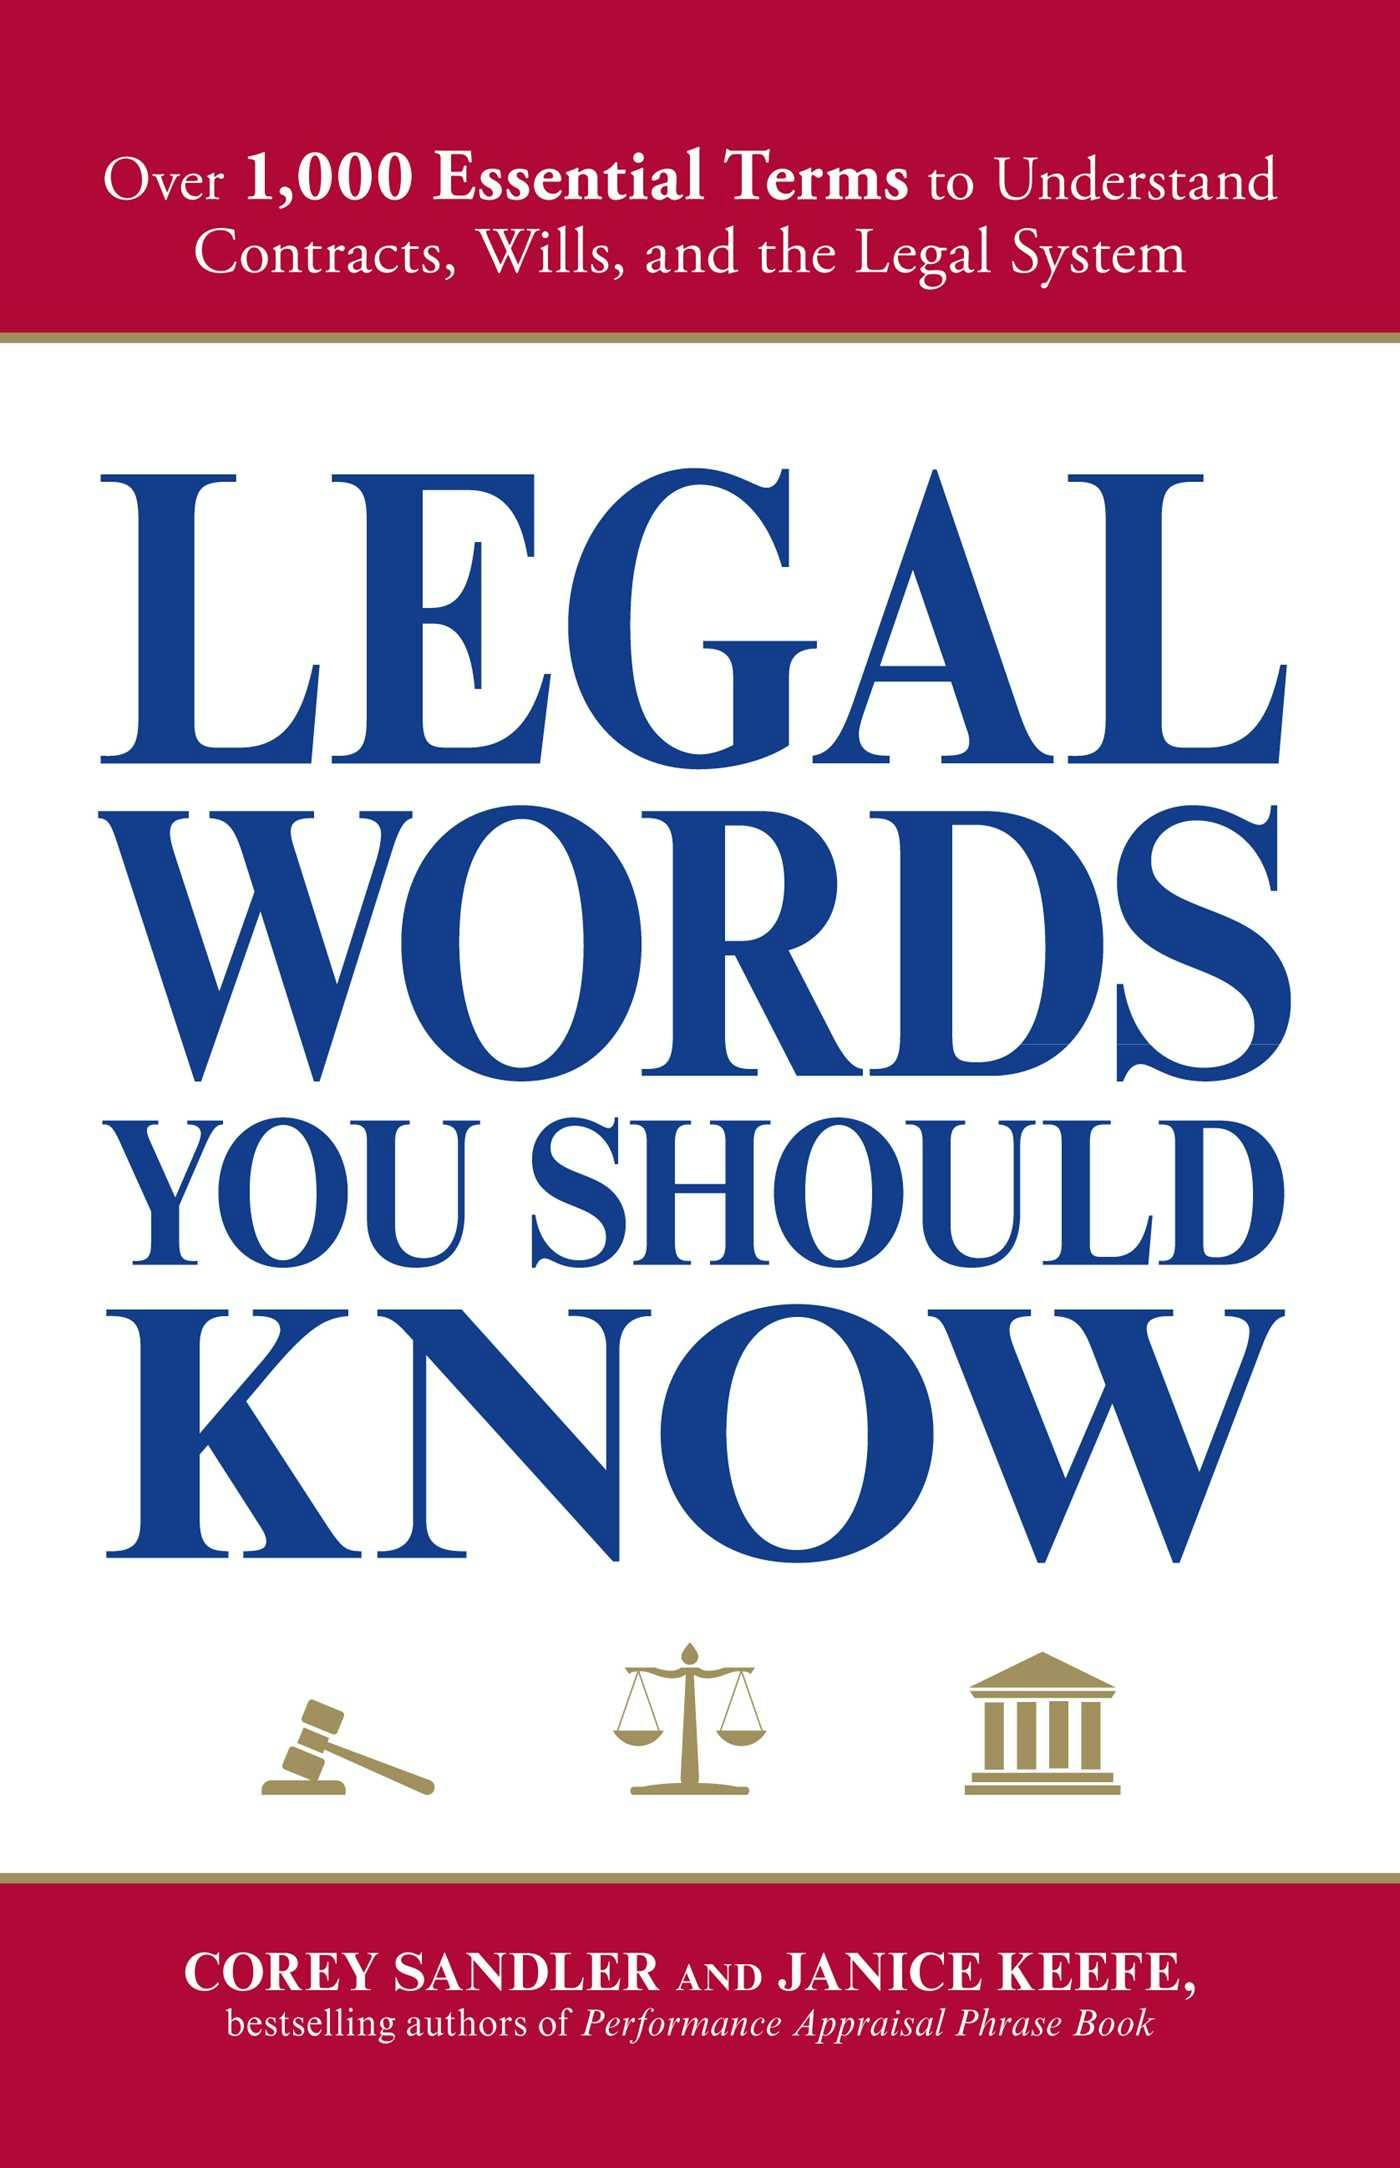 Legal Words You Should Know: Over 1,000 Essential Terms to Understand Contracts, Wills, and the Legal System - undefined